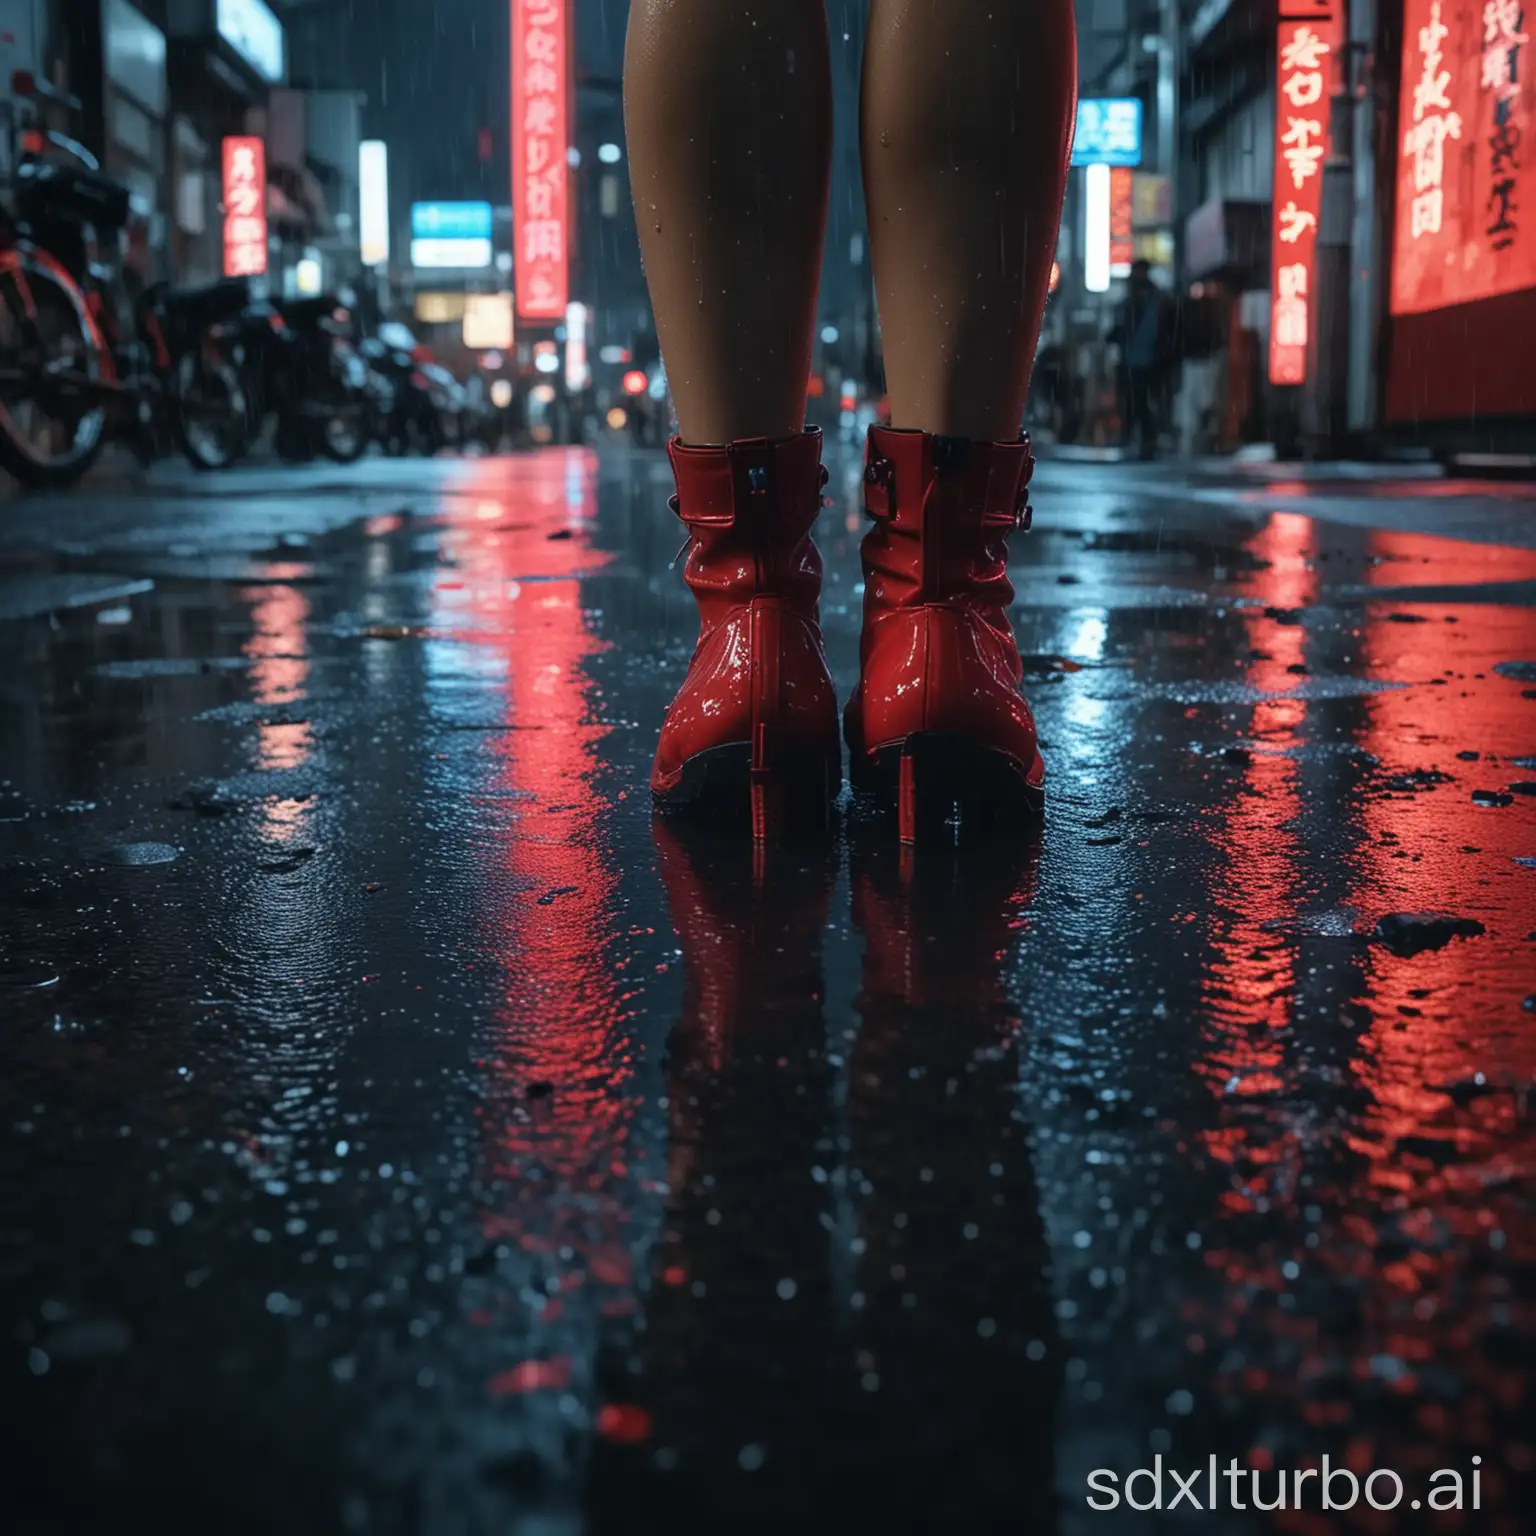 Still from a movie, low angle view of beautiful legs, cyberpunk neons in red and blue, neons reflecting in puddles of water, Tokyo city street raining, neons, raining in the city, alone in the street. GENDRE: Drama DIRECTOR: Hirokazu Kore-eda. COLOR: Red and blue, satured, ASPECT RATIO: 1.85 - Spherical, Super 35 format: Film - 35mm, FRAME SIZE: Extreme wide SHOT, TYPE: 2 shot, Establishing shot LENS SIZE: Wide COMPOSITION: Center LIGHTING: Shot light, in Japan, Tokyo